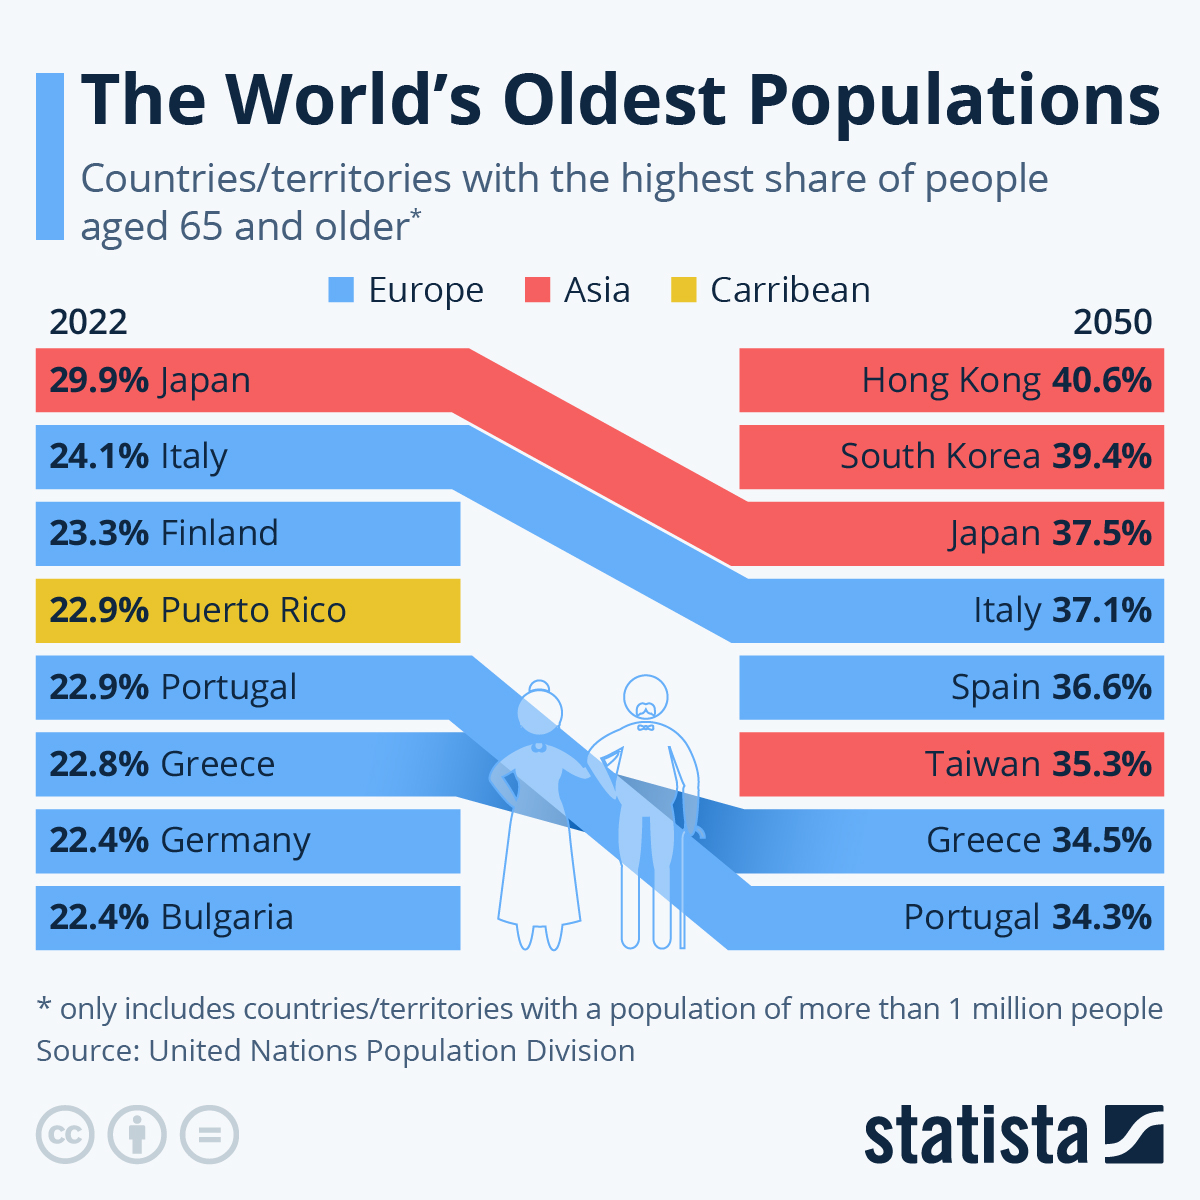 A chart showing the world's oldest populations, showing data for 2022 and projections for 2050.